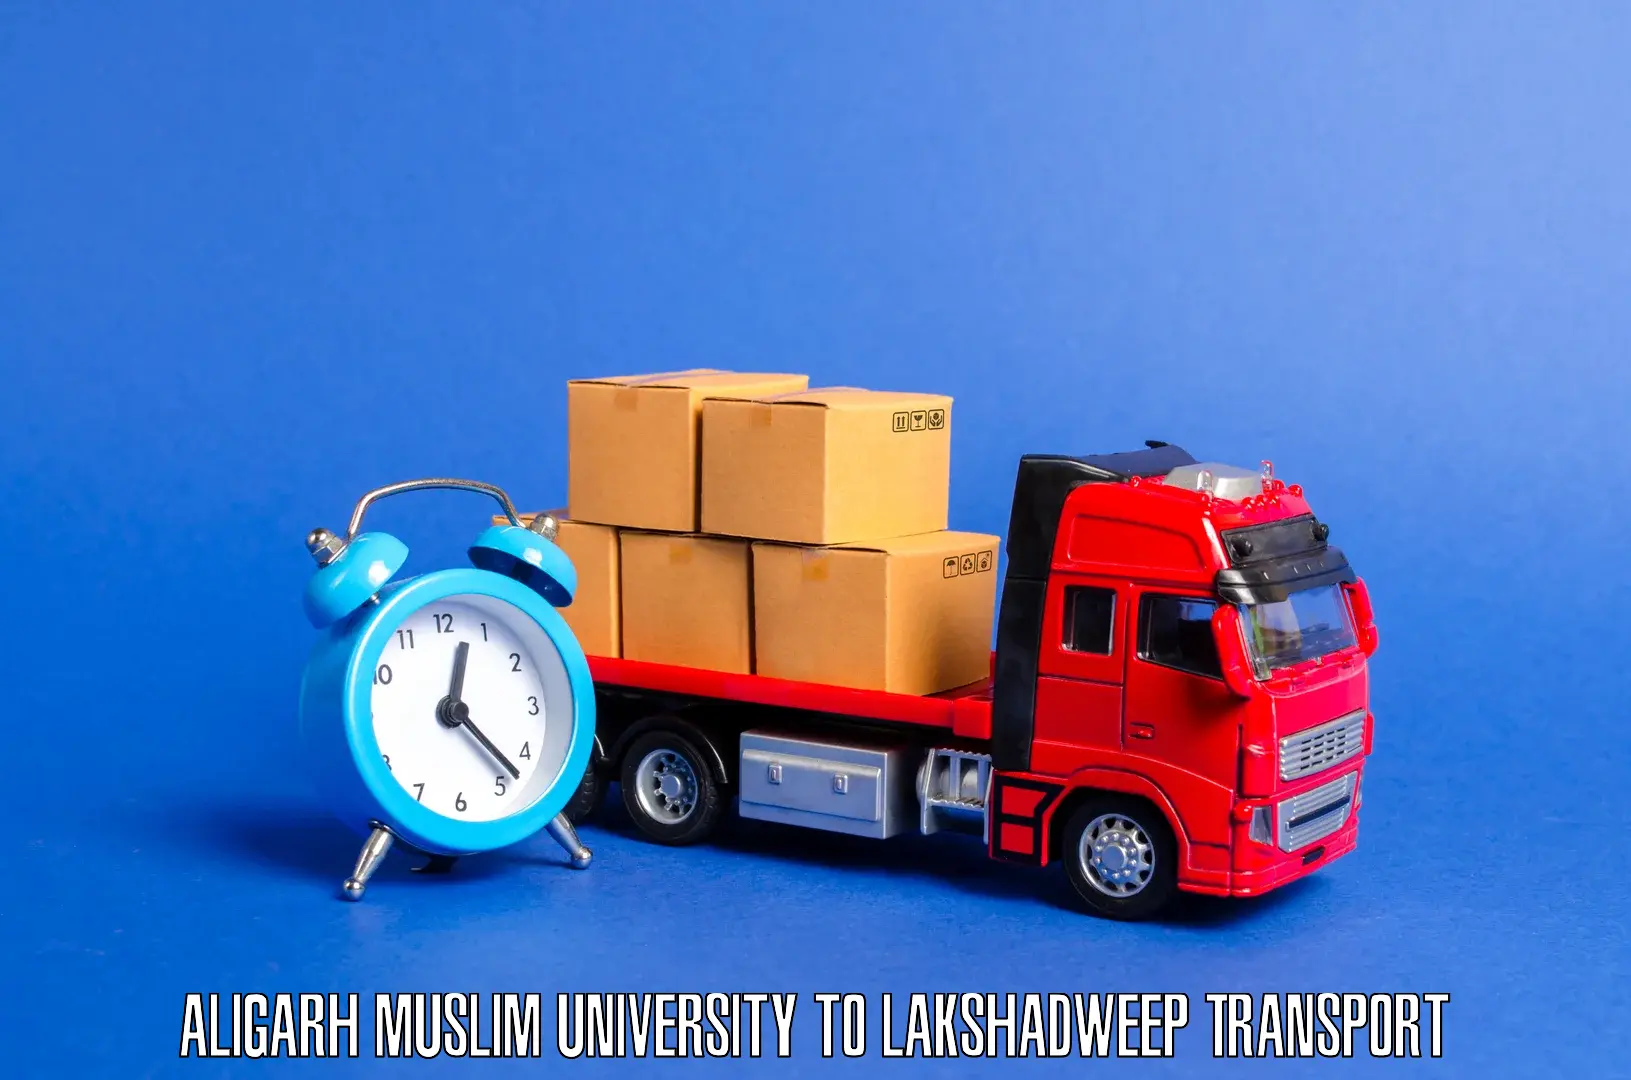 Best transport services in India Aligarh Muslim University to Lakshadweep